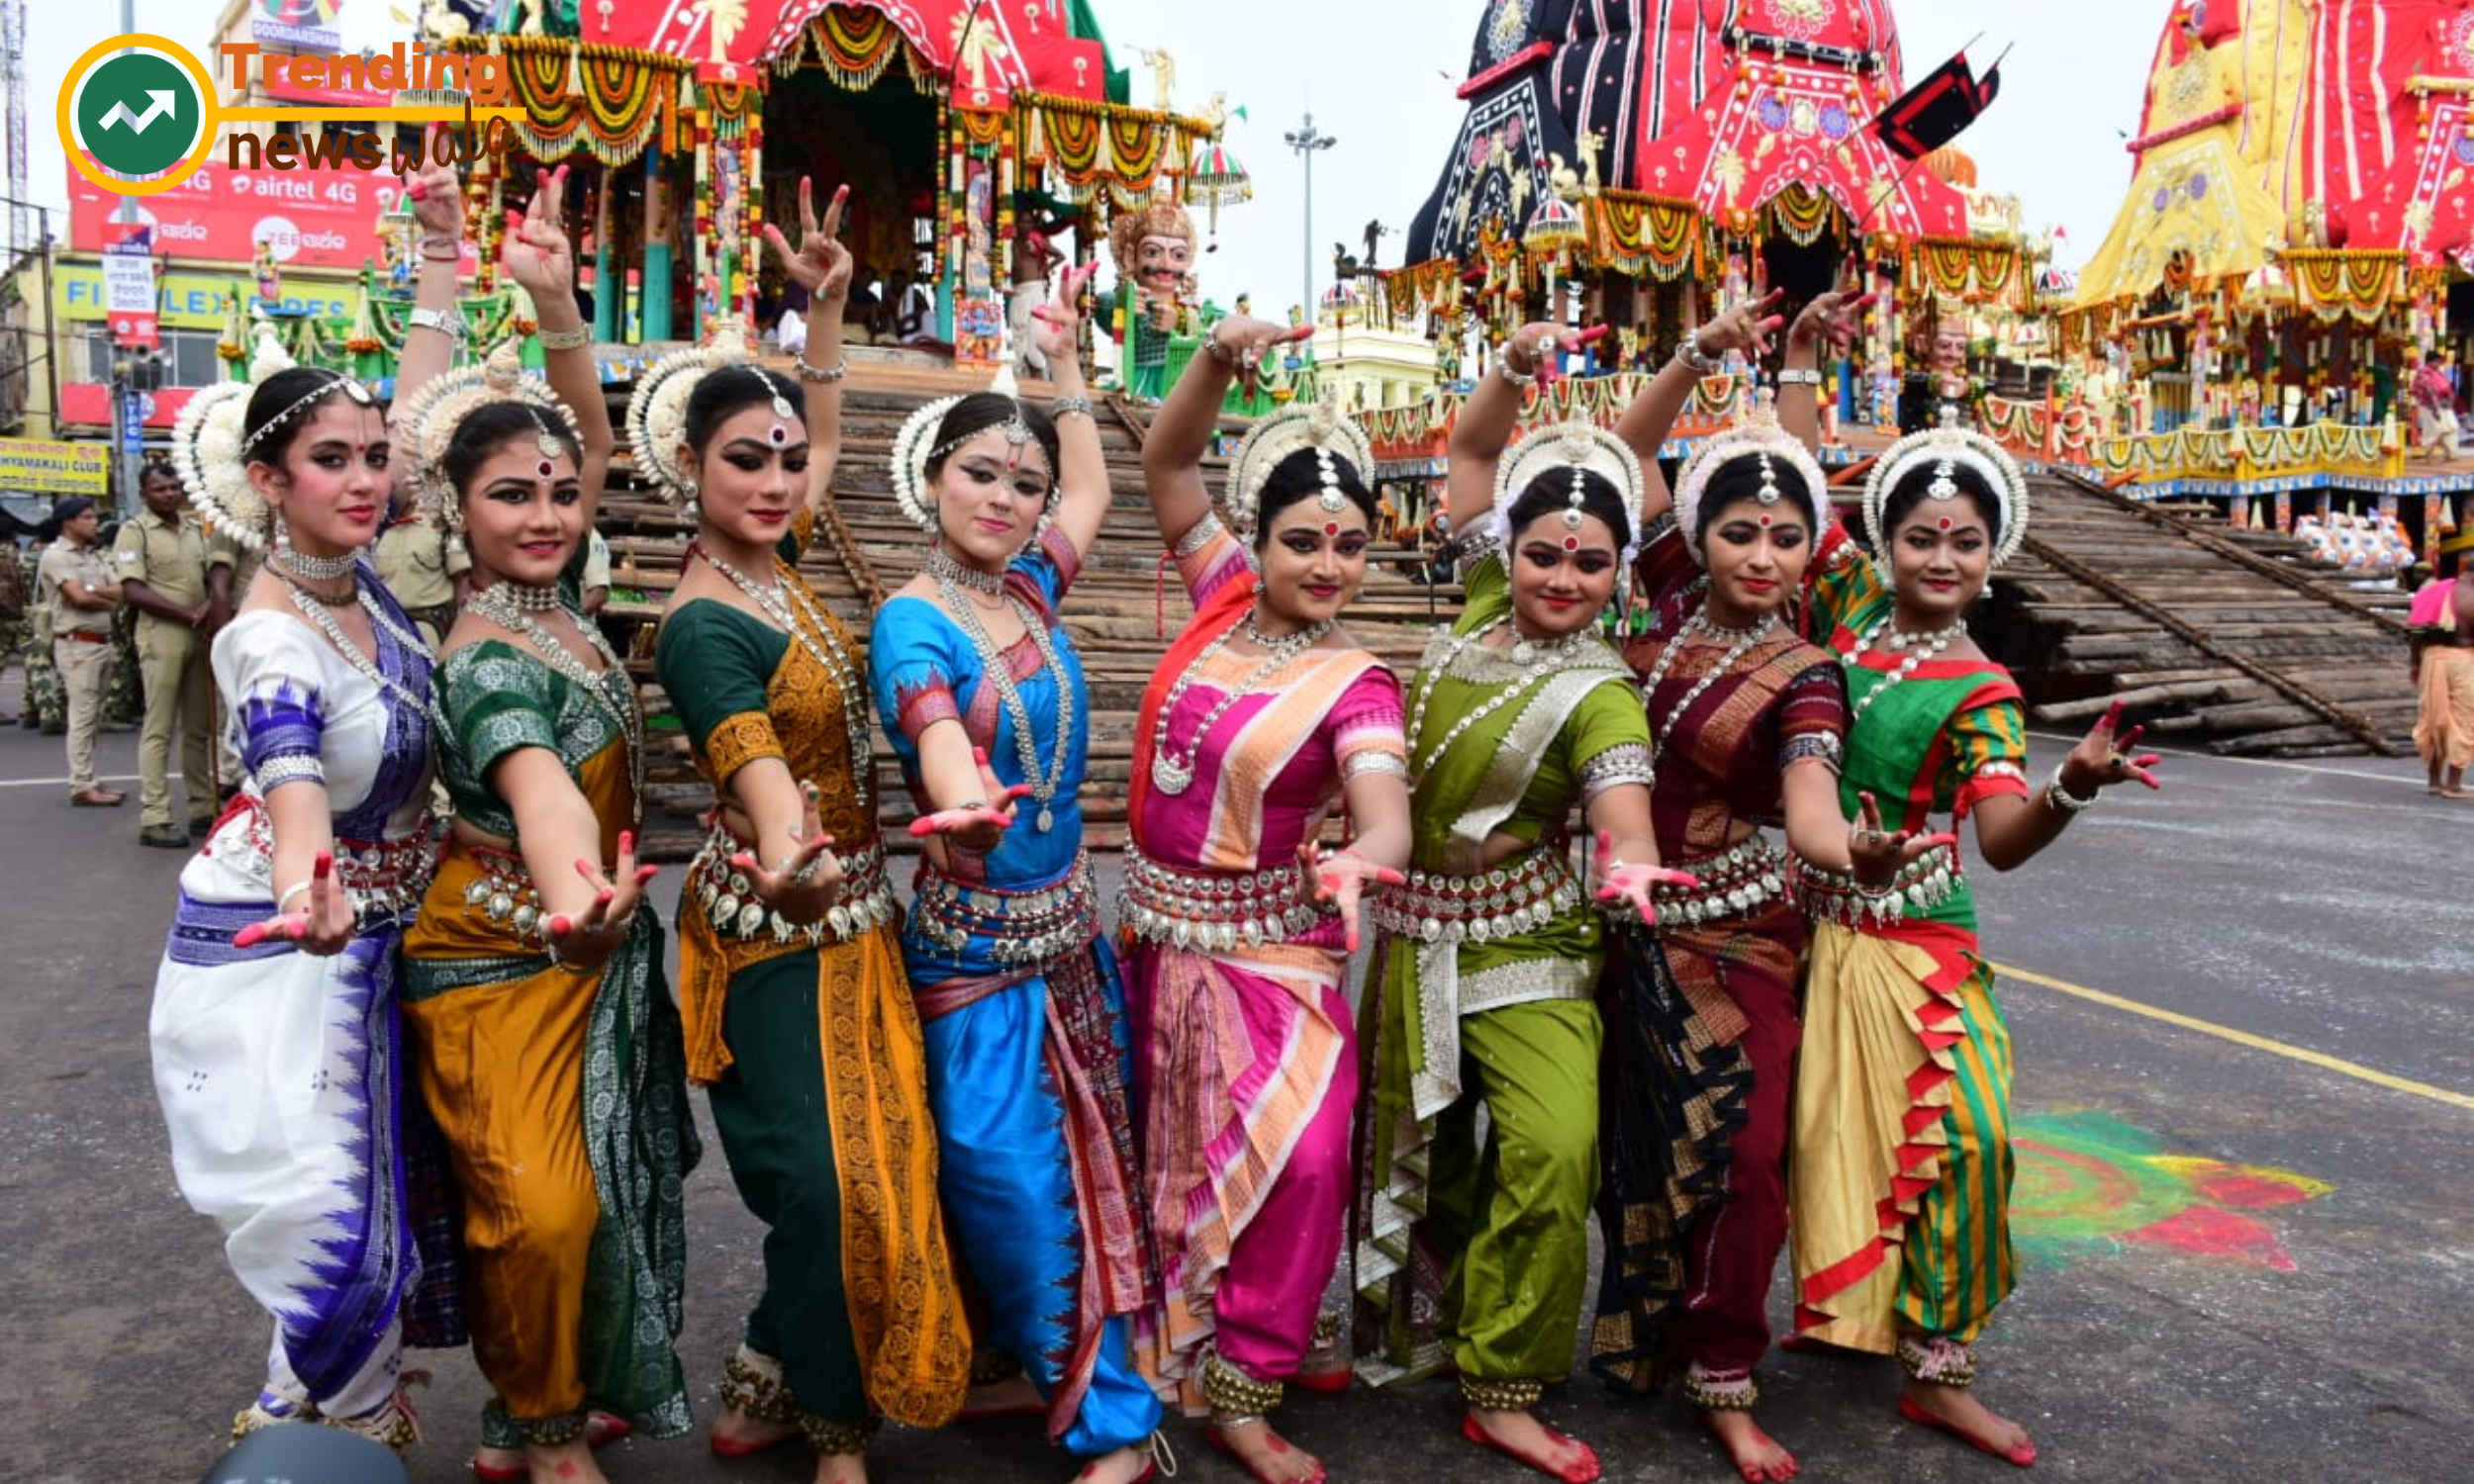 Ratha Yatra festival attire and dress code procession typically wear traditional Indian